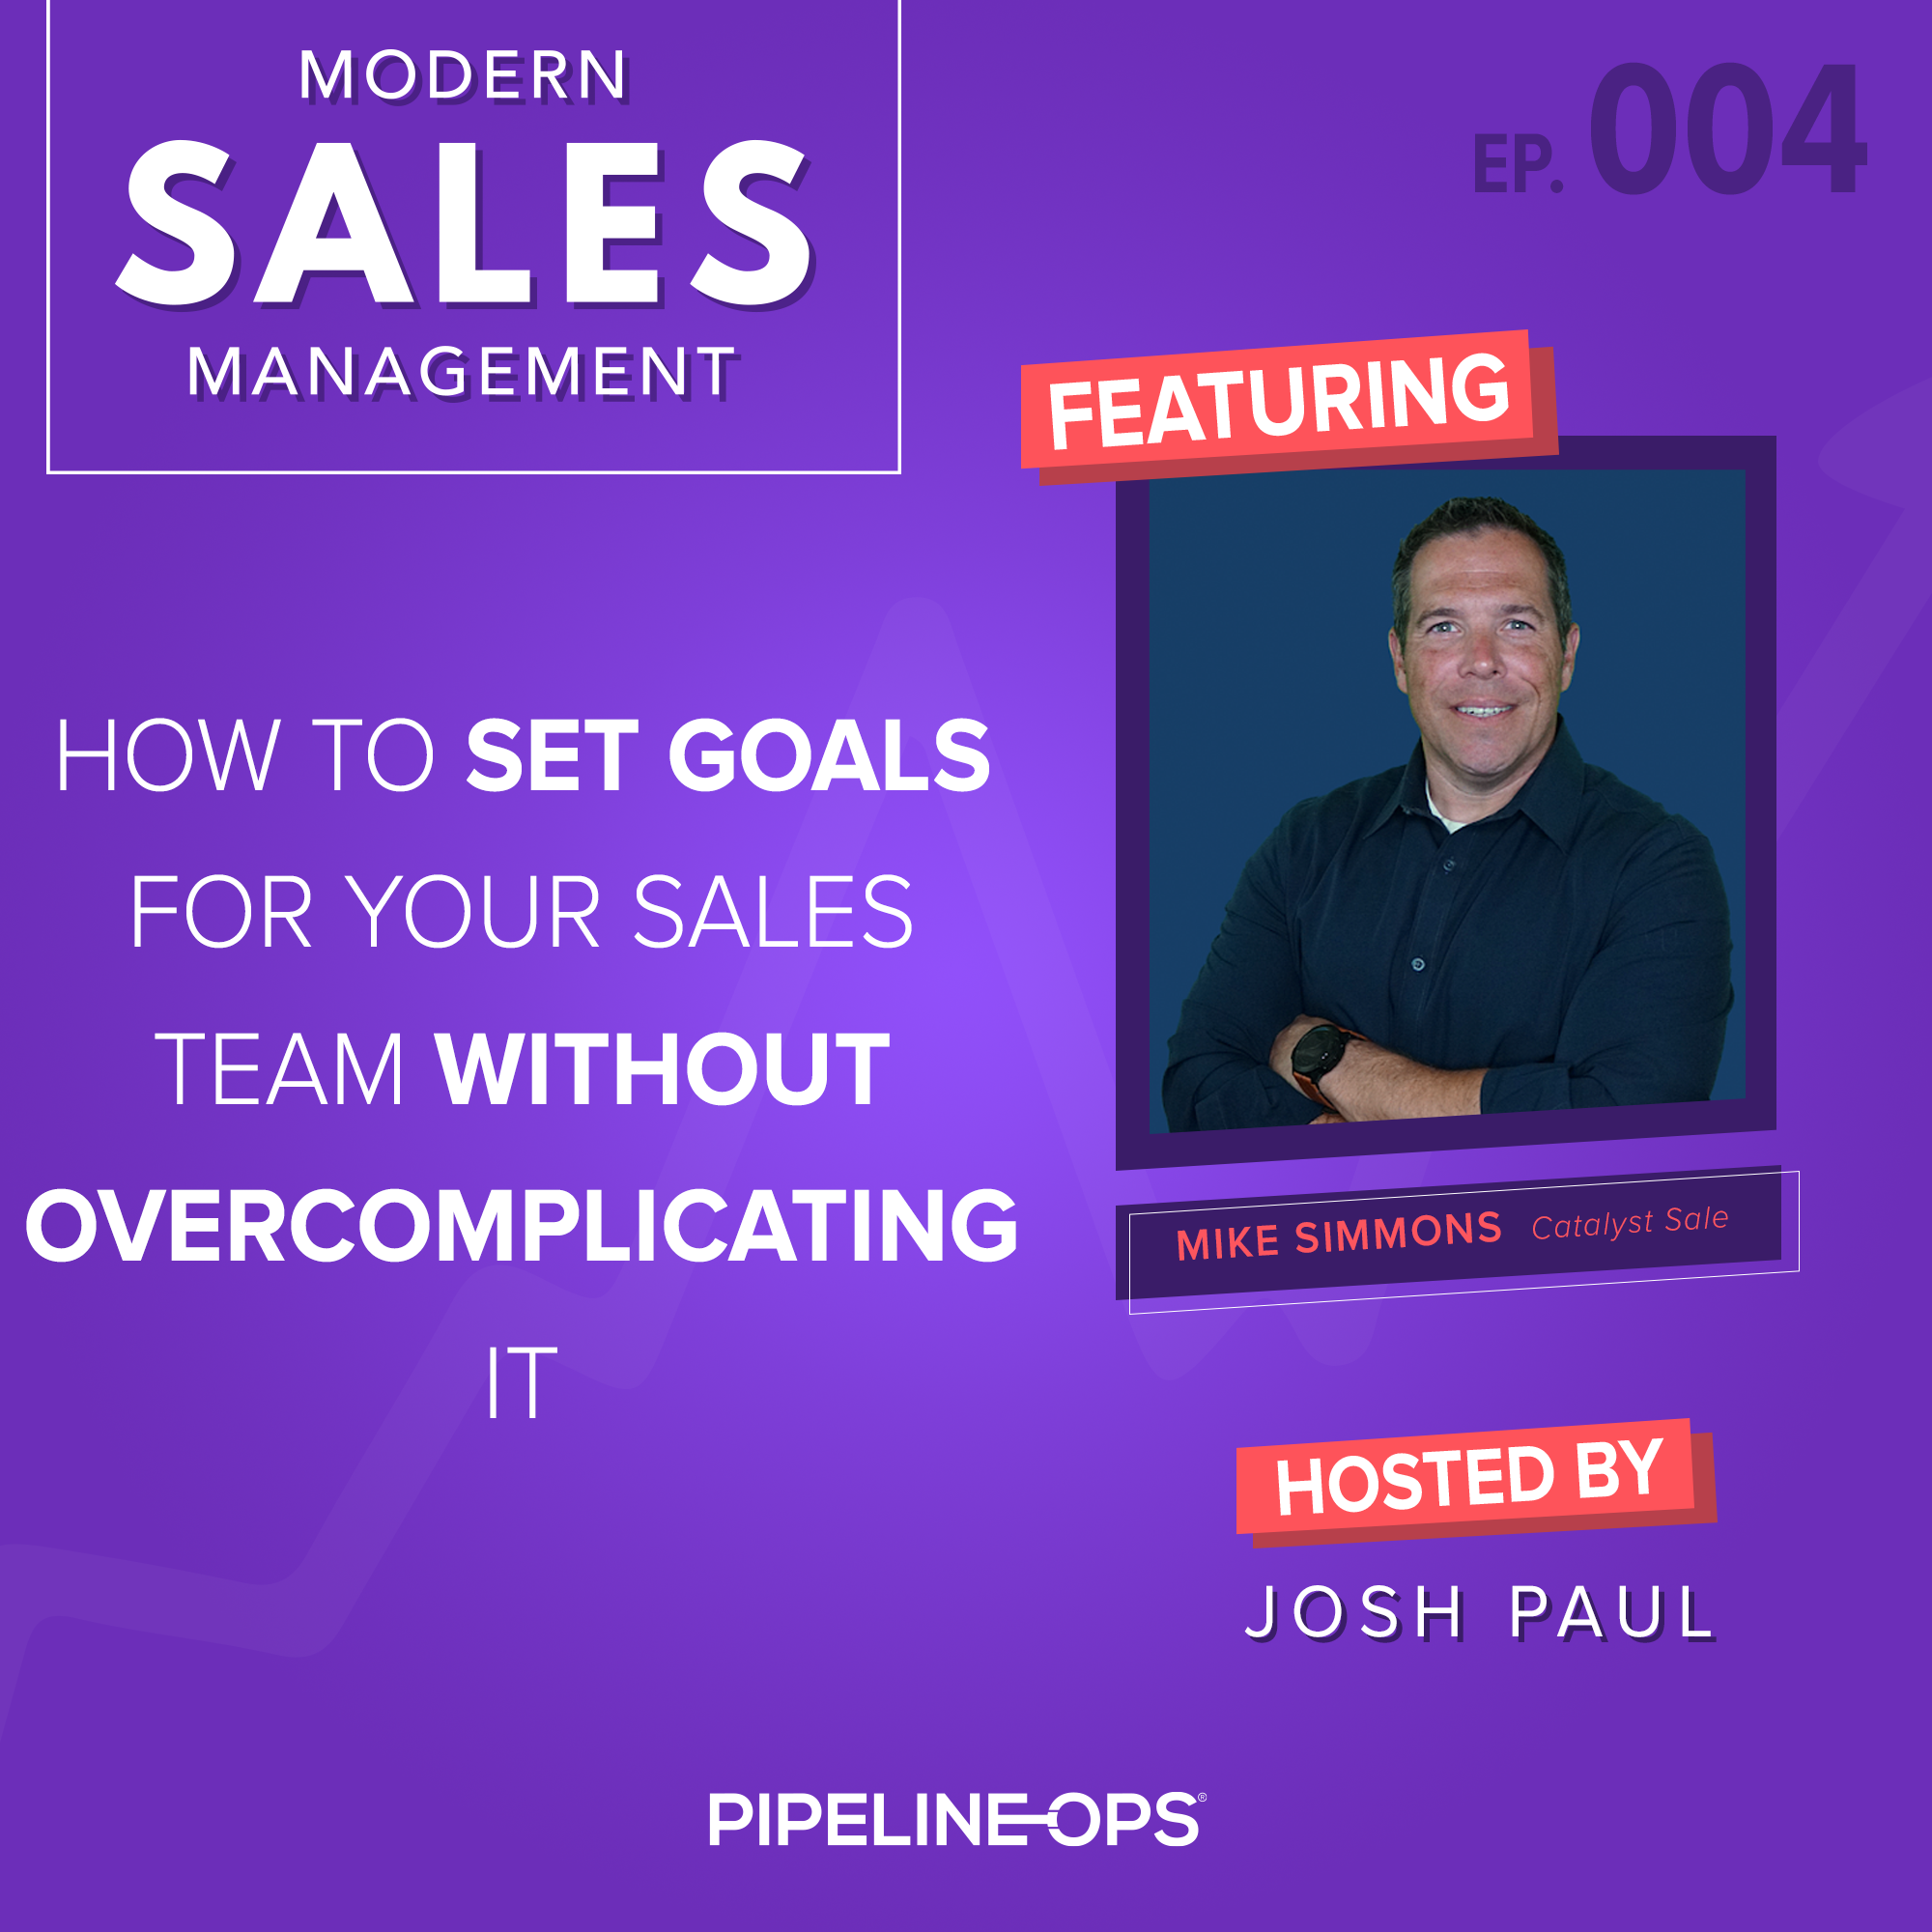 How to Set Goals for Your Sales Team With Mike Simmons